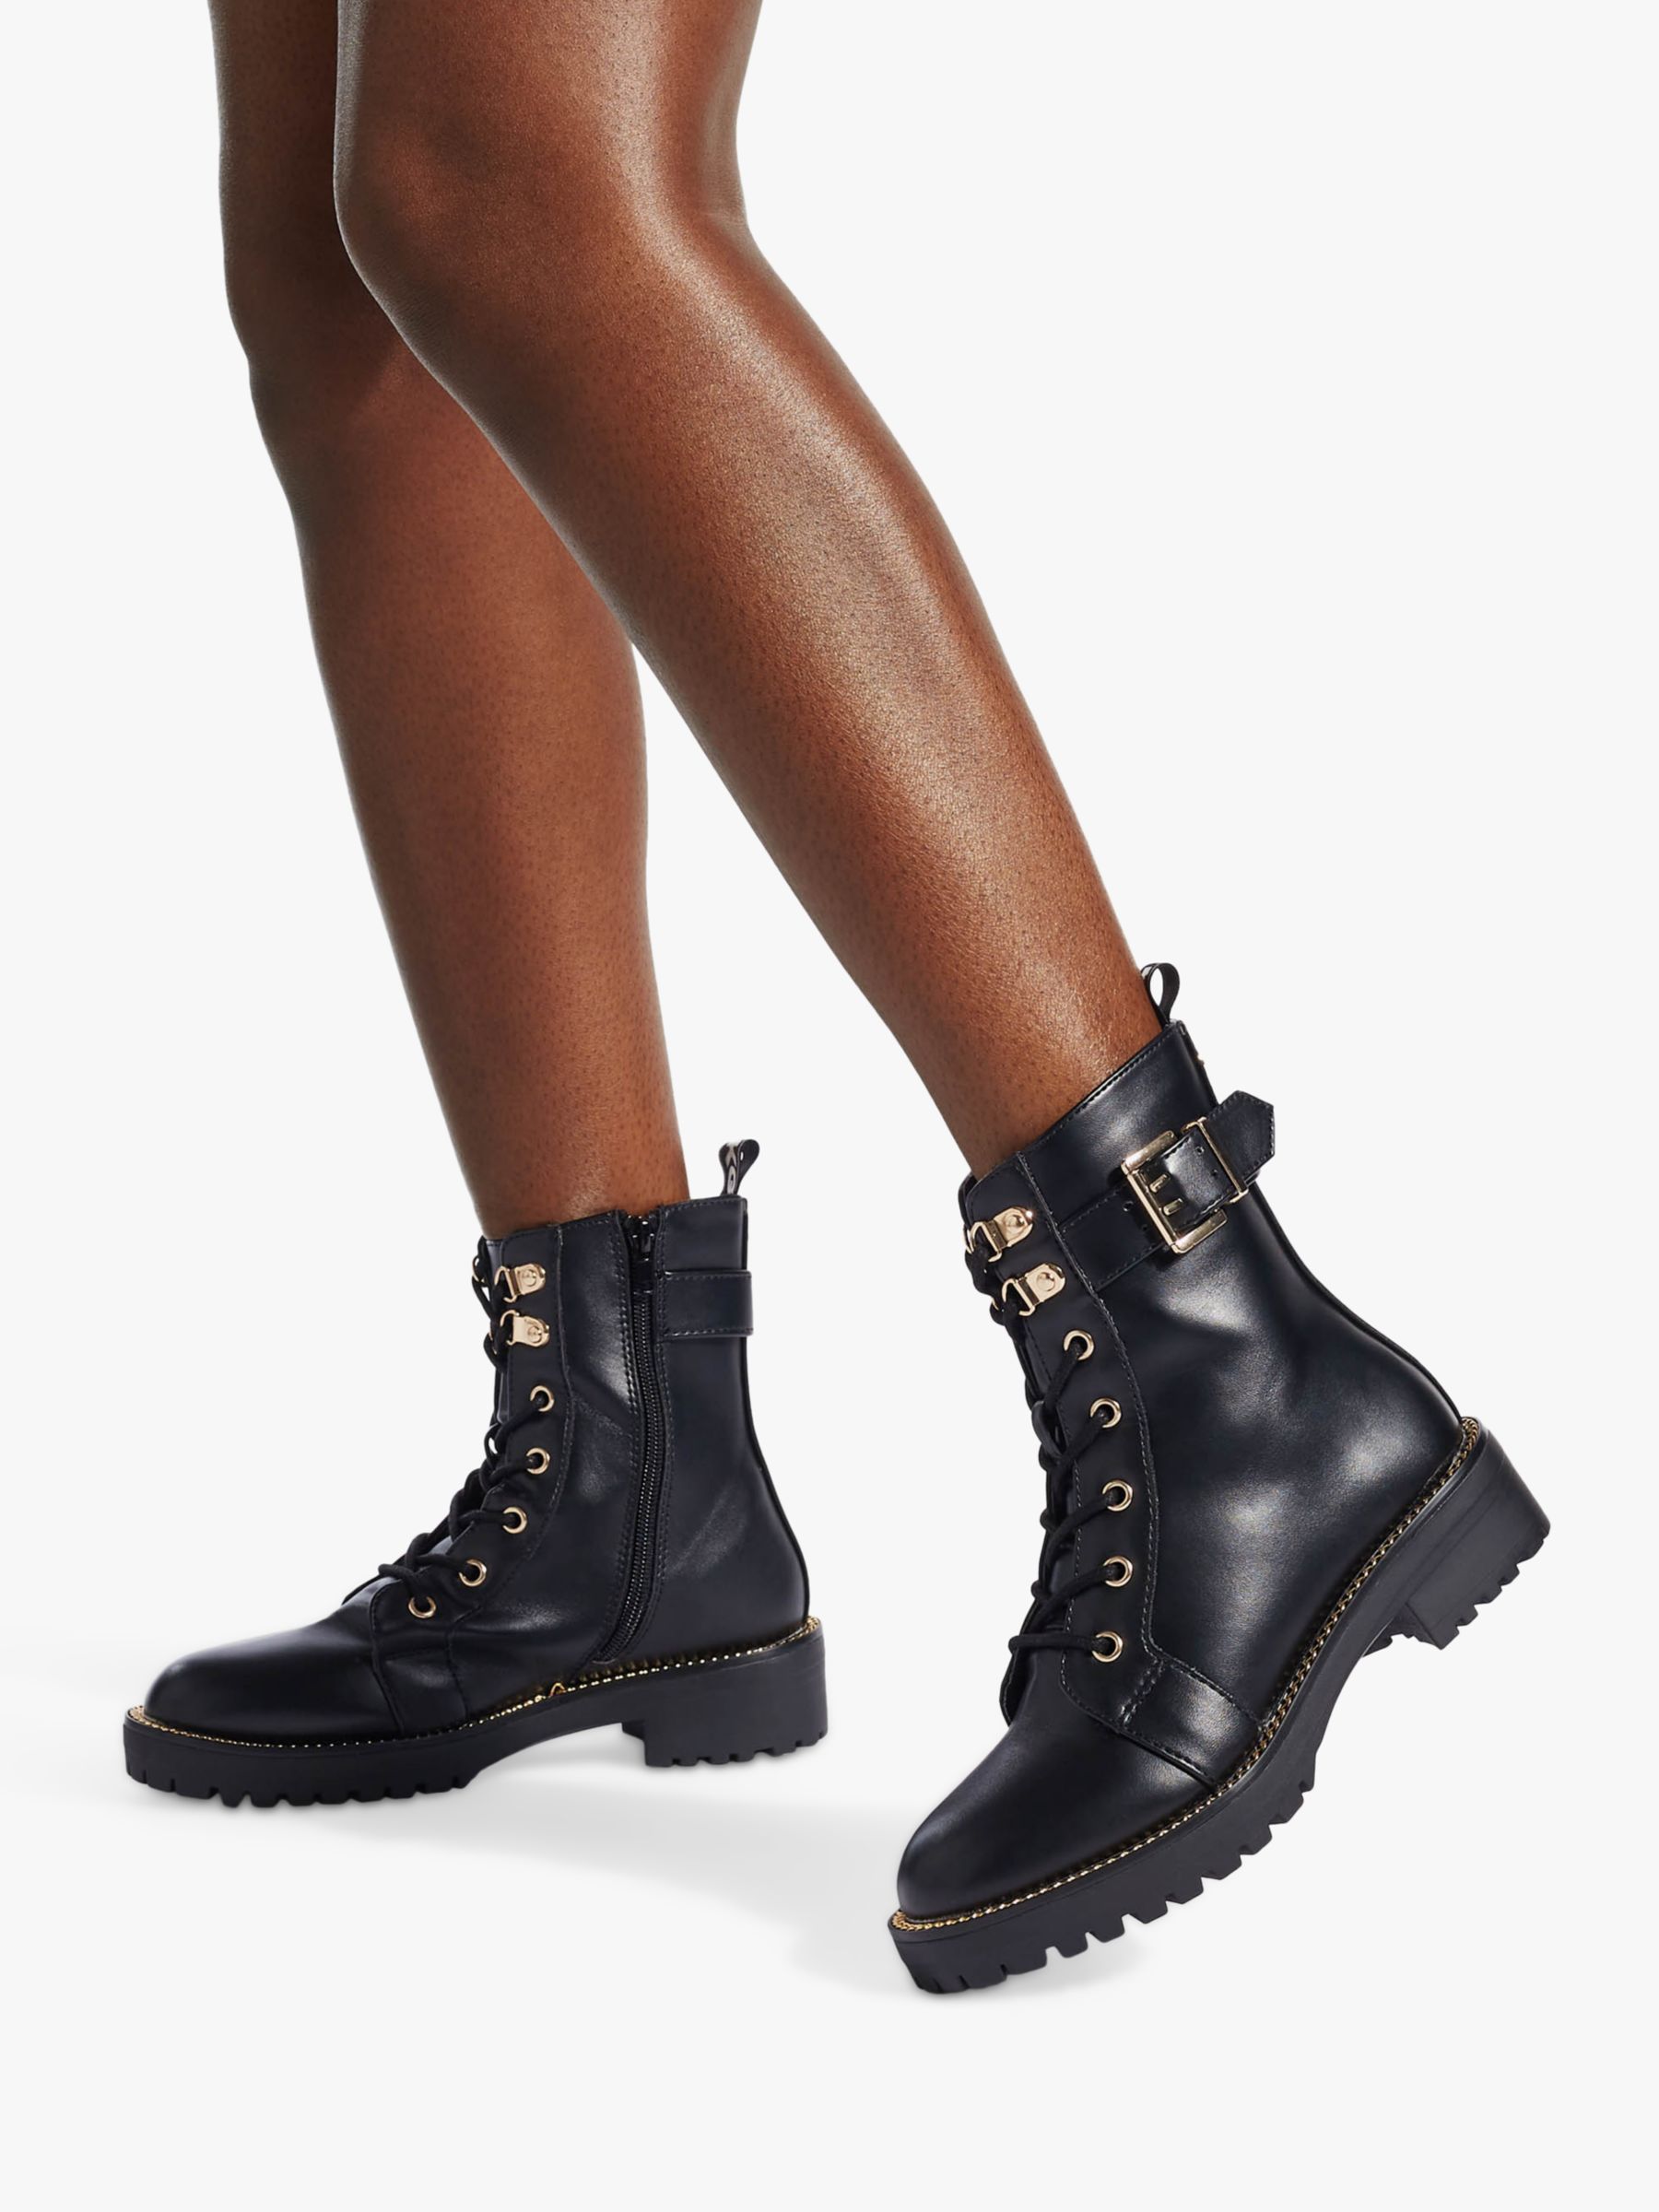 Tips
For Buying Biker Boots For Women